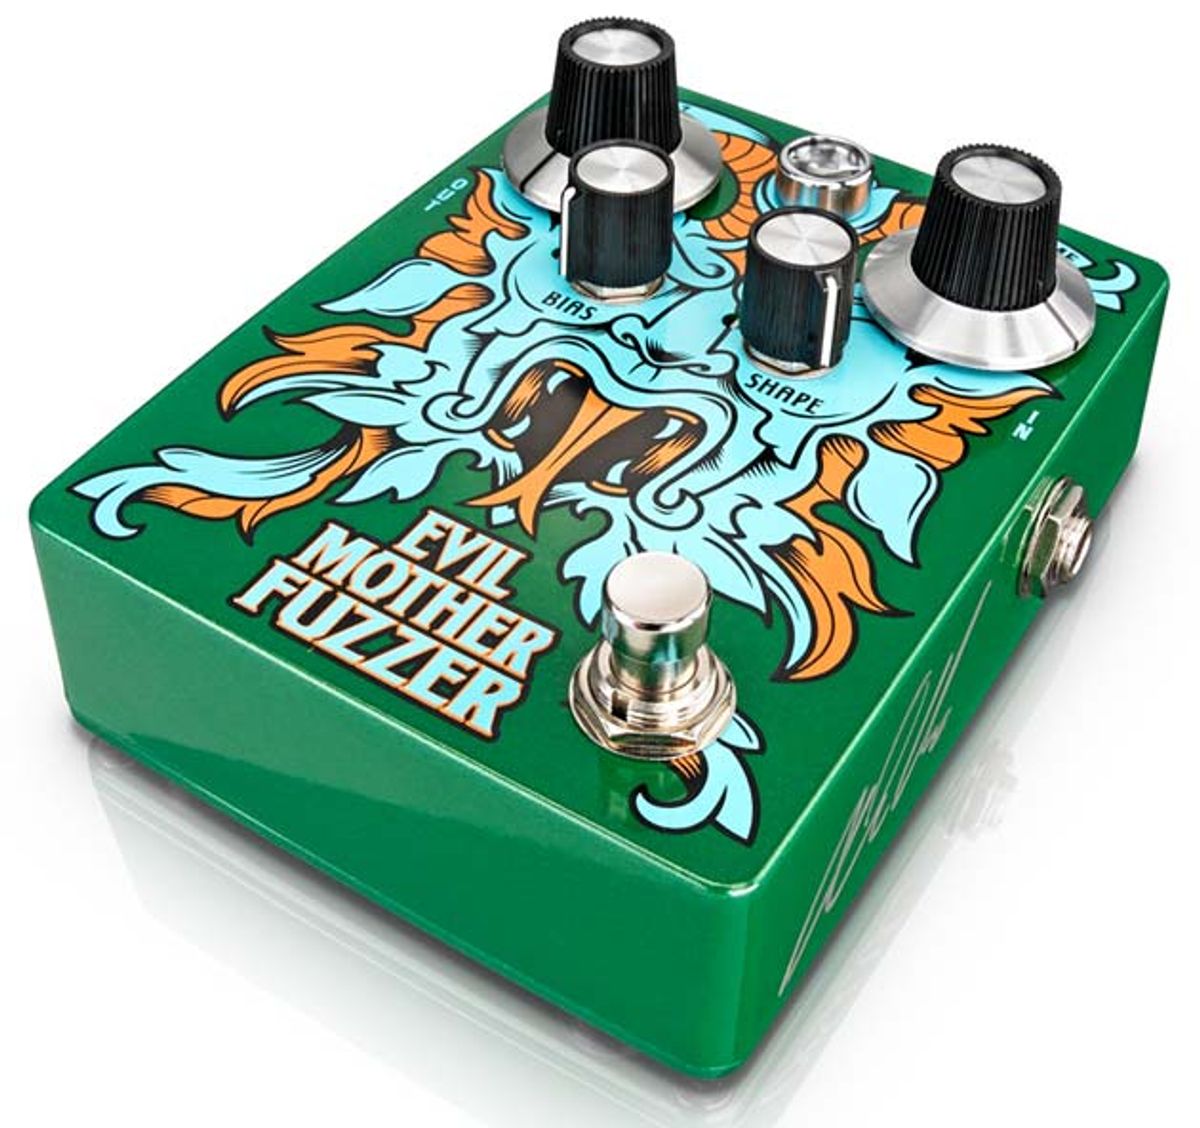 Dr. No Effects Unleashes the Evil MotherFuzzer